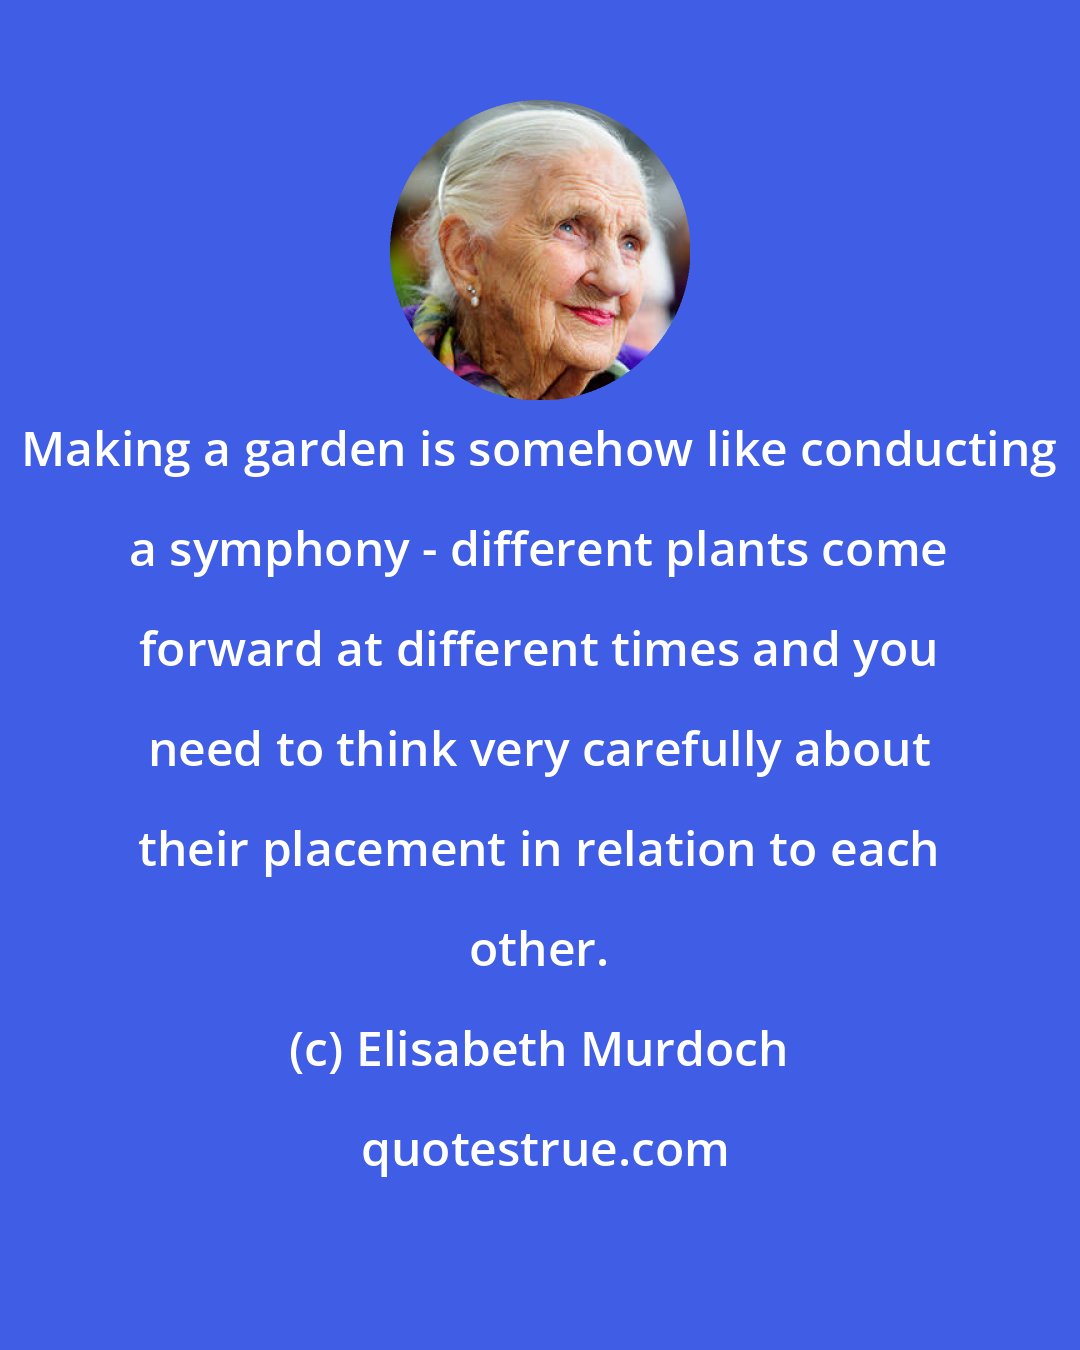 Elisabeth Murdoch: Making a garden is somehow like conducting a symphony - different plants come forward at different times and you need to think very carefully about their placement in relation to each other.